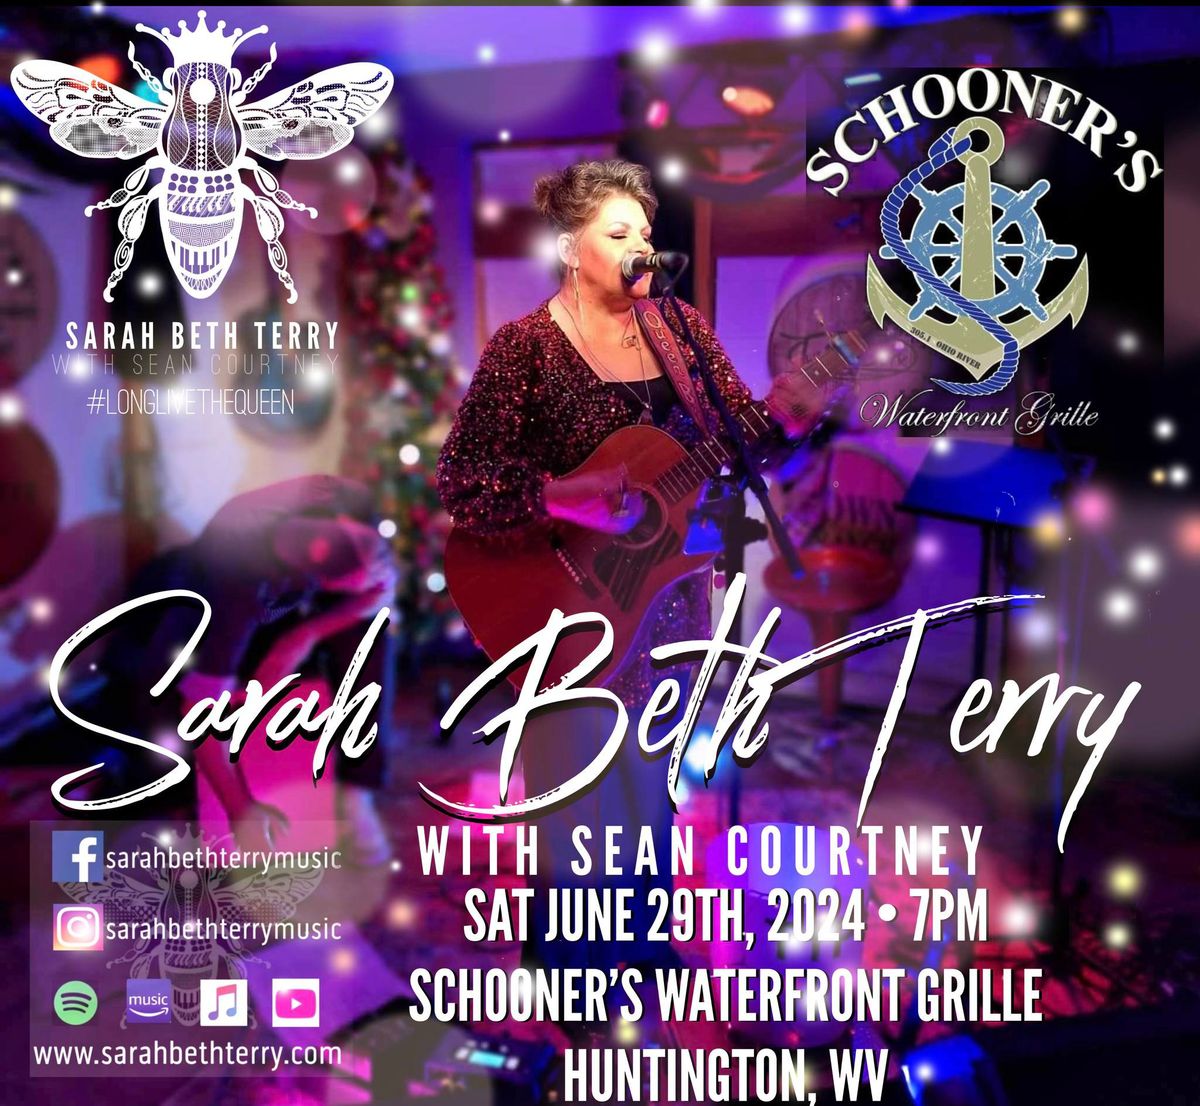 Sarah Beth Terry "Roll It Up & Smoke It" Tour - at Schooner's Waterfront Grille - Huntington, WV